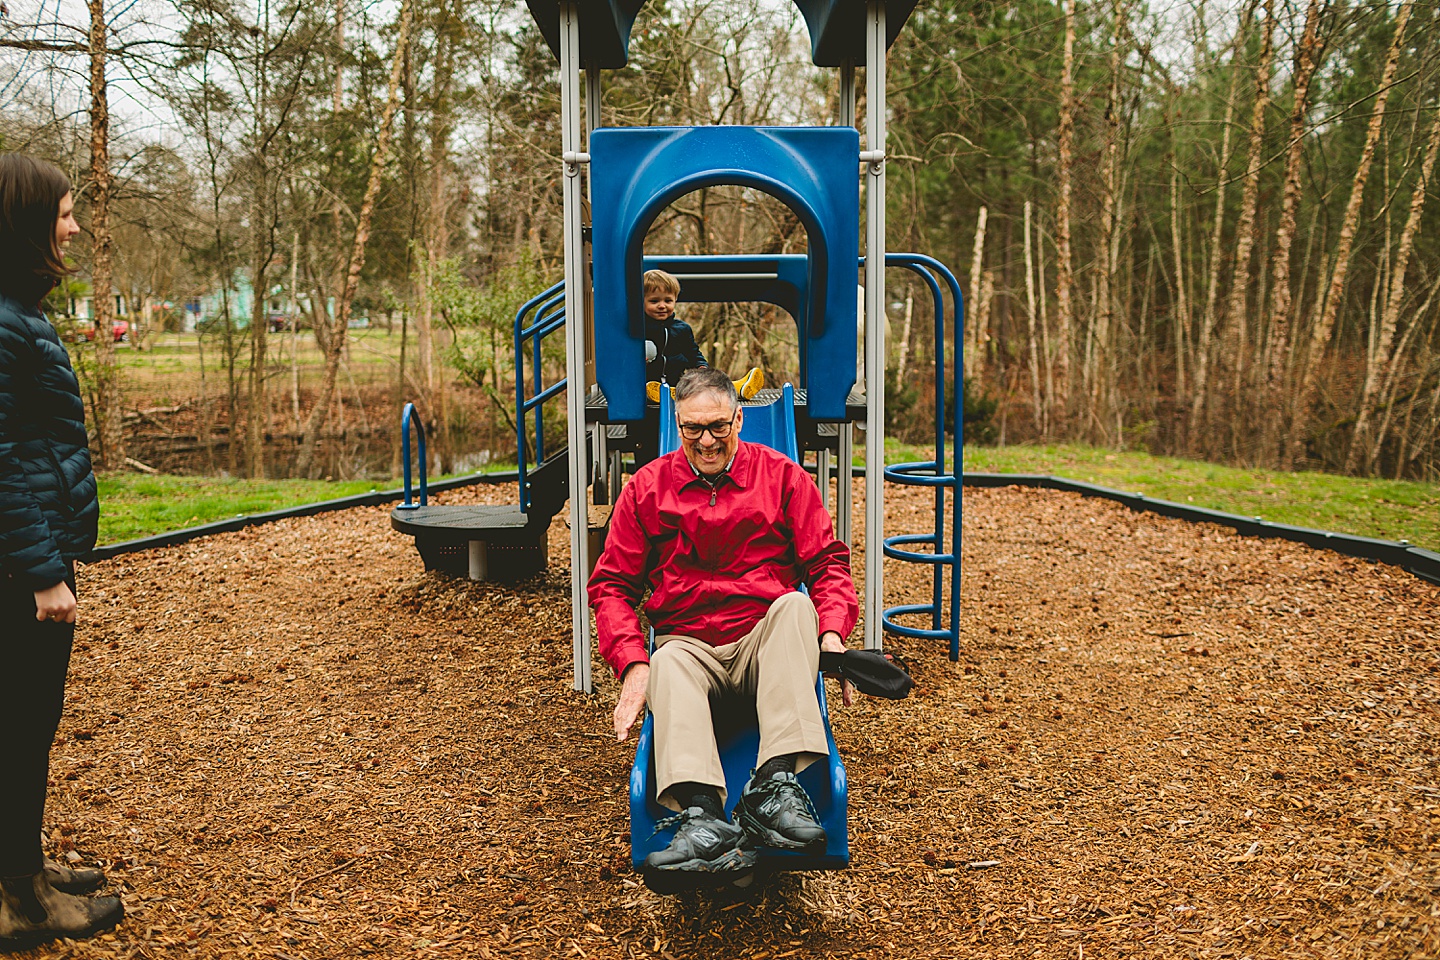 Grandpa using the slide at park while playing with grandson